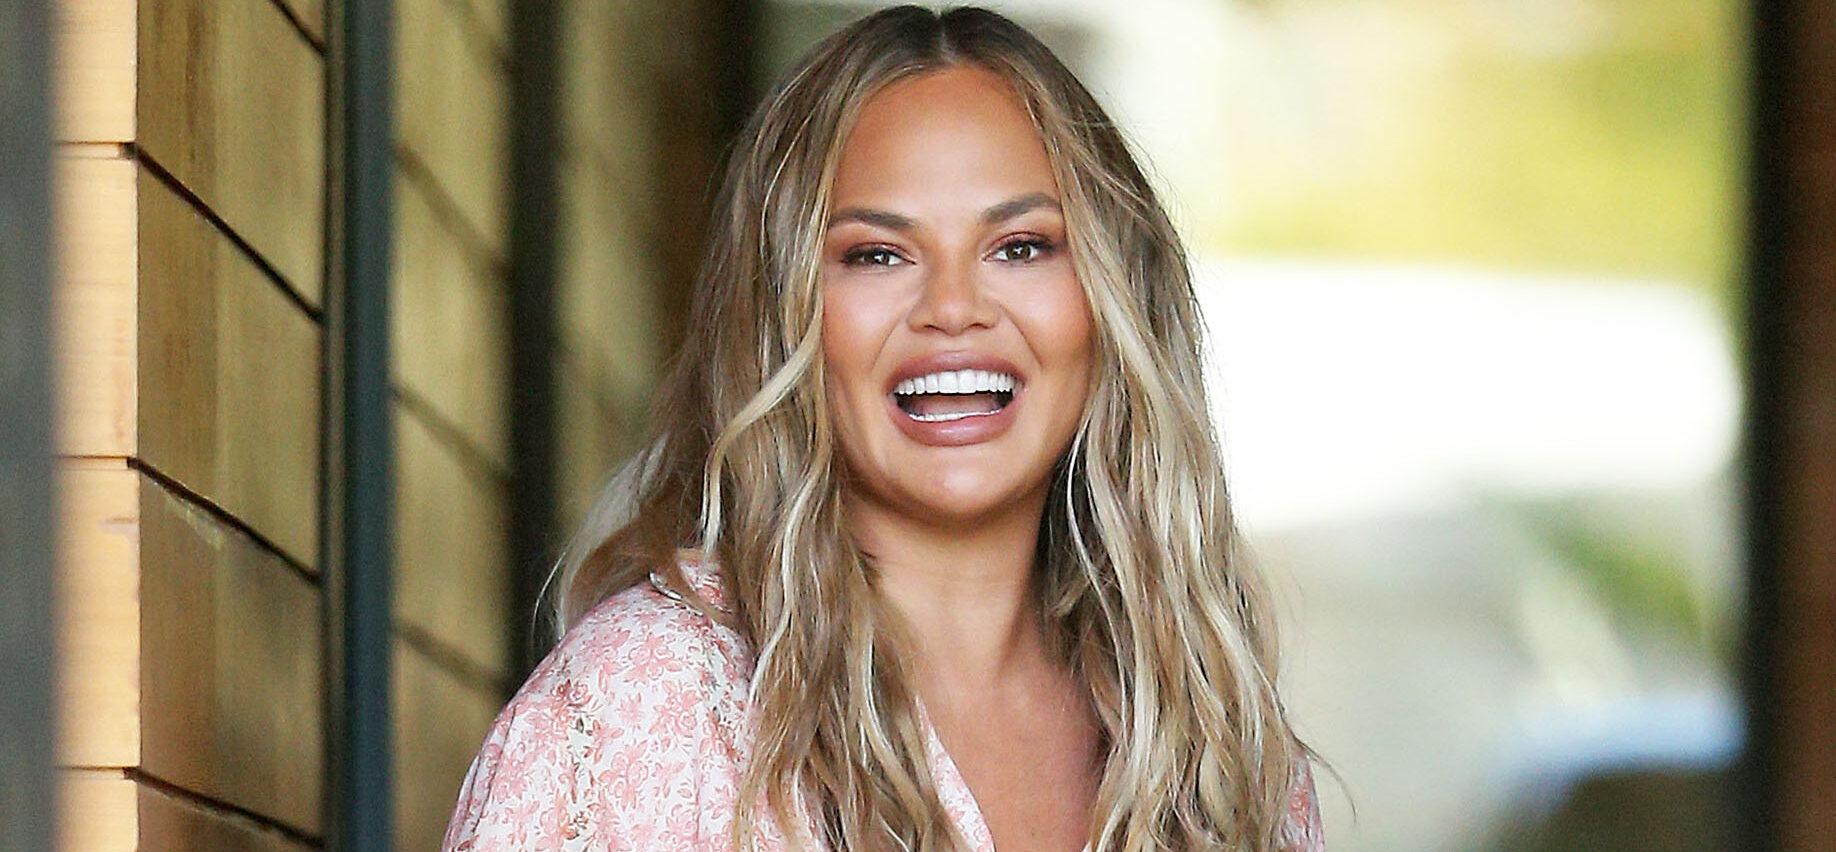 Chrissy Teigen’s Never Laughed Harder Than At Her Son’s Little League Game!